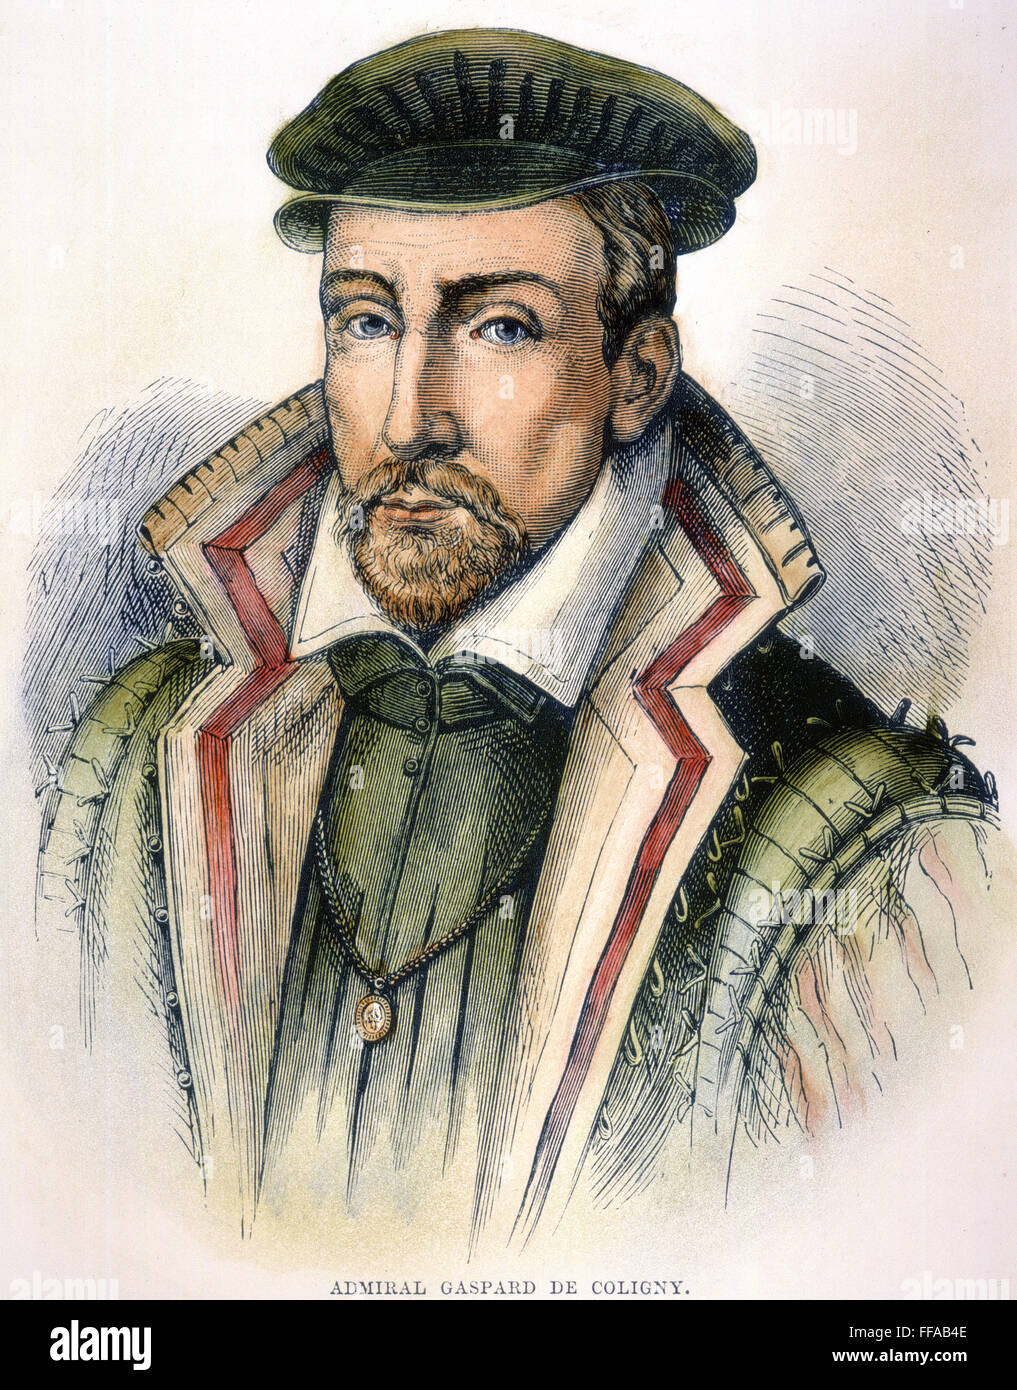 GASPARD DE COLIGNY /n(1519-72). French Protestant leader, admiral of France adviser to King Henry IV and King Charles IX. Wood engraving, 19th century. Stock Photo